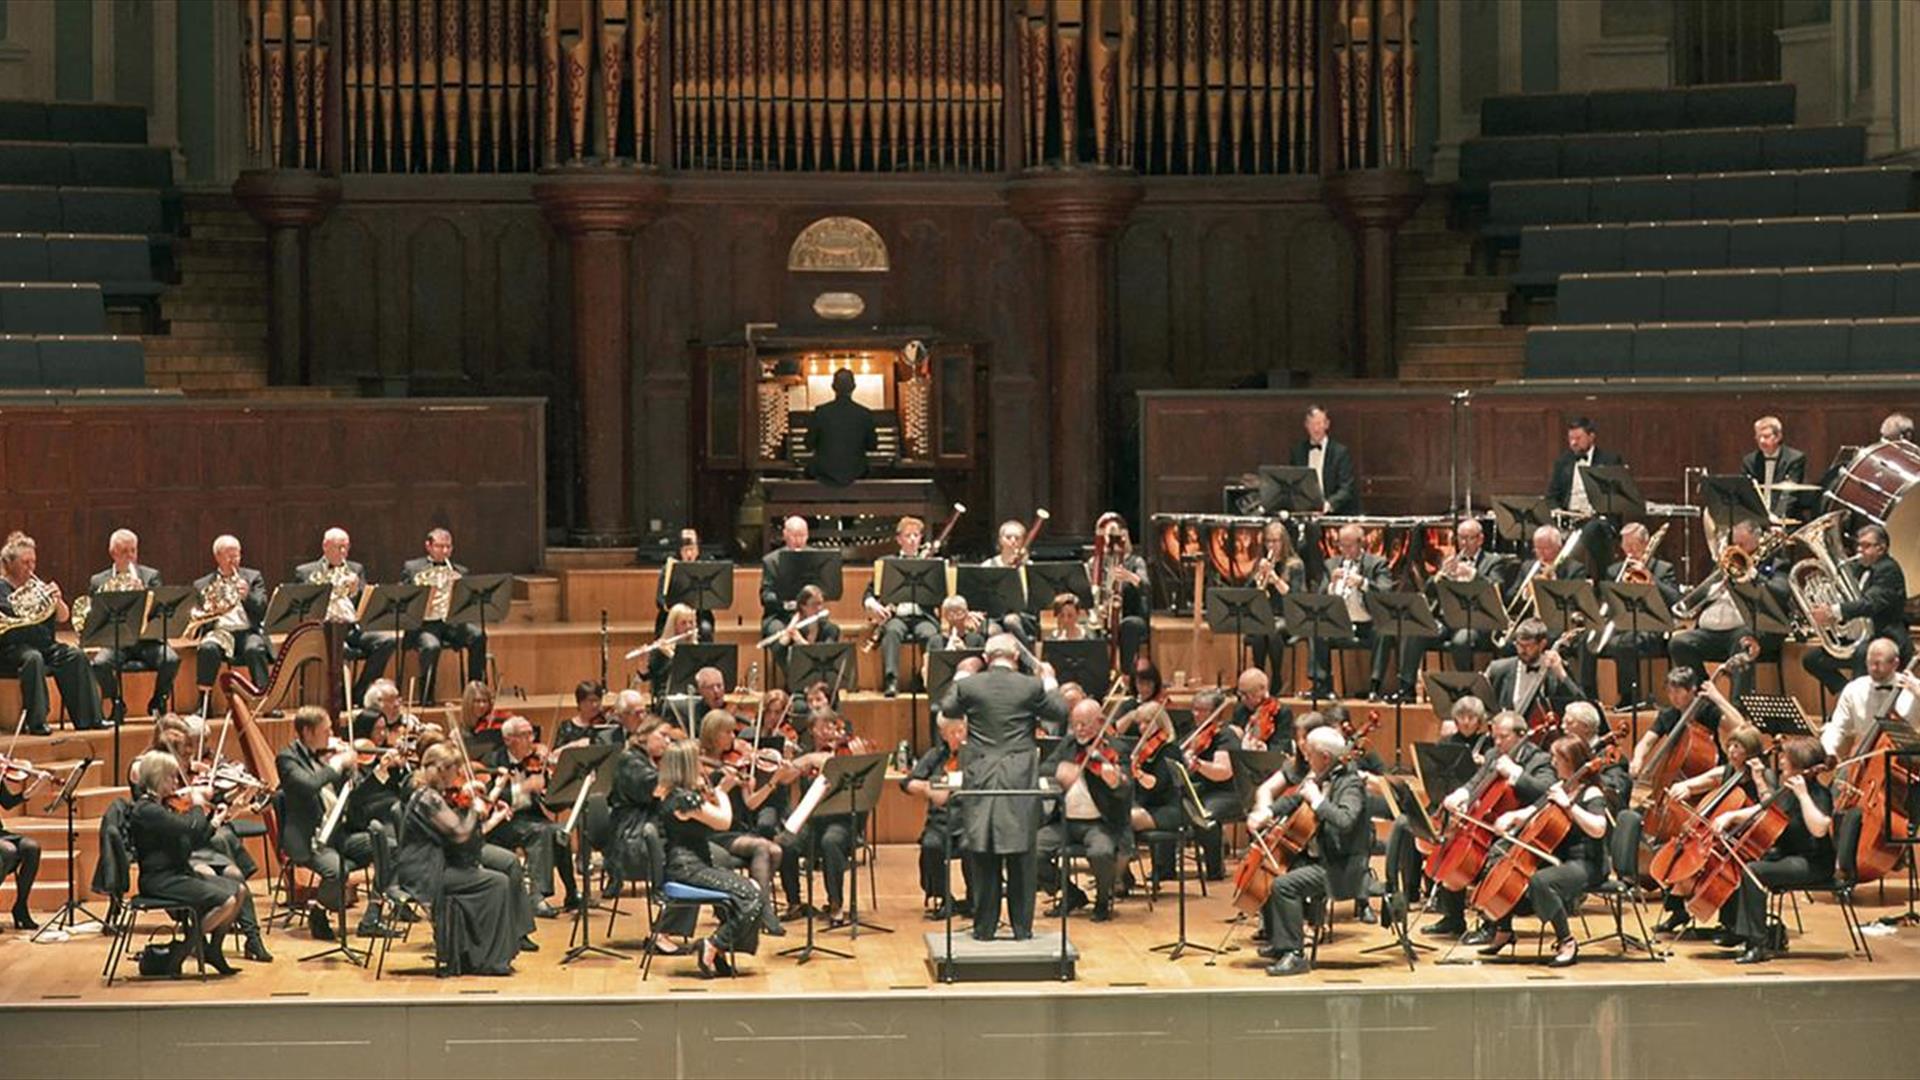 Image is of Studio Symphony Orchestra on stage